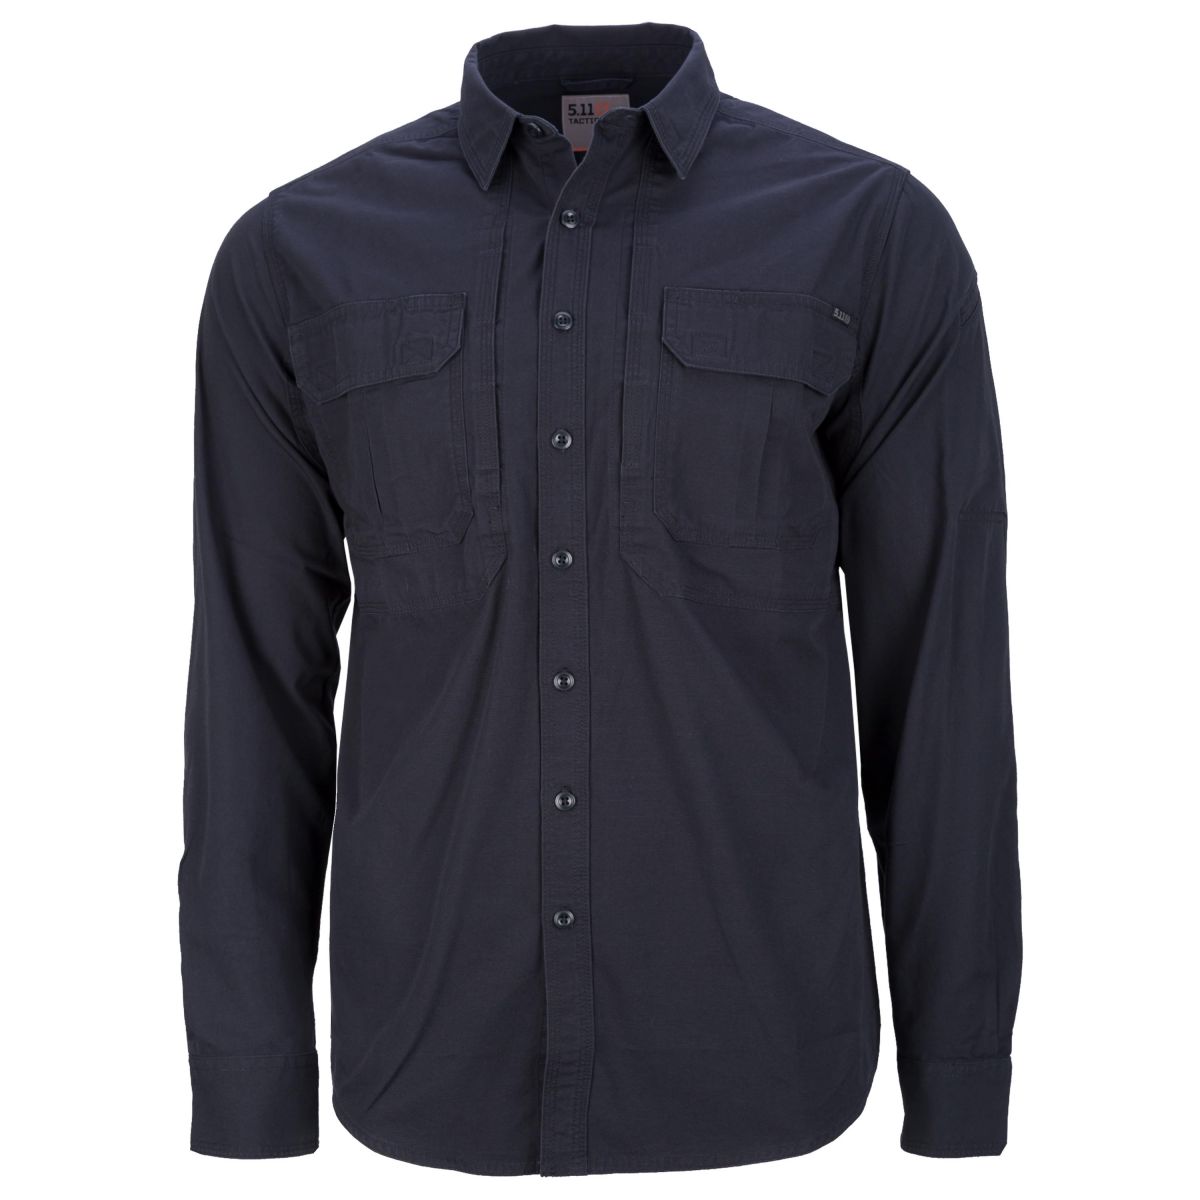 Purchase the 5.11 Expedition Long Sleeve Shirt stone wash black